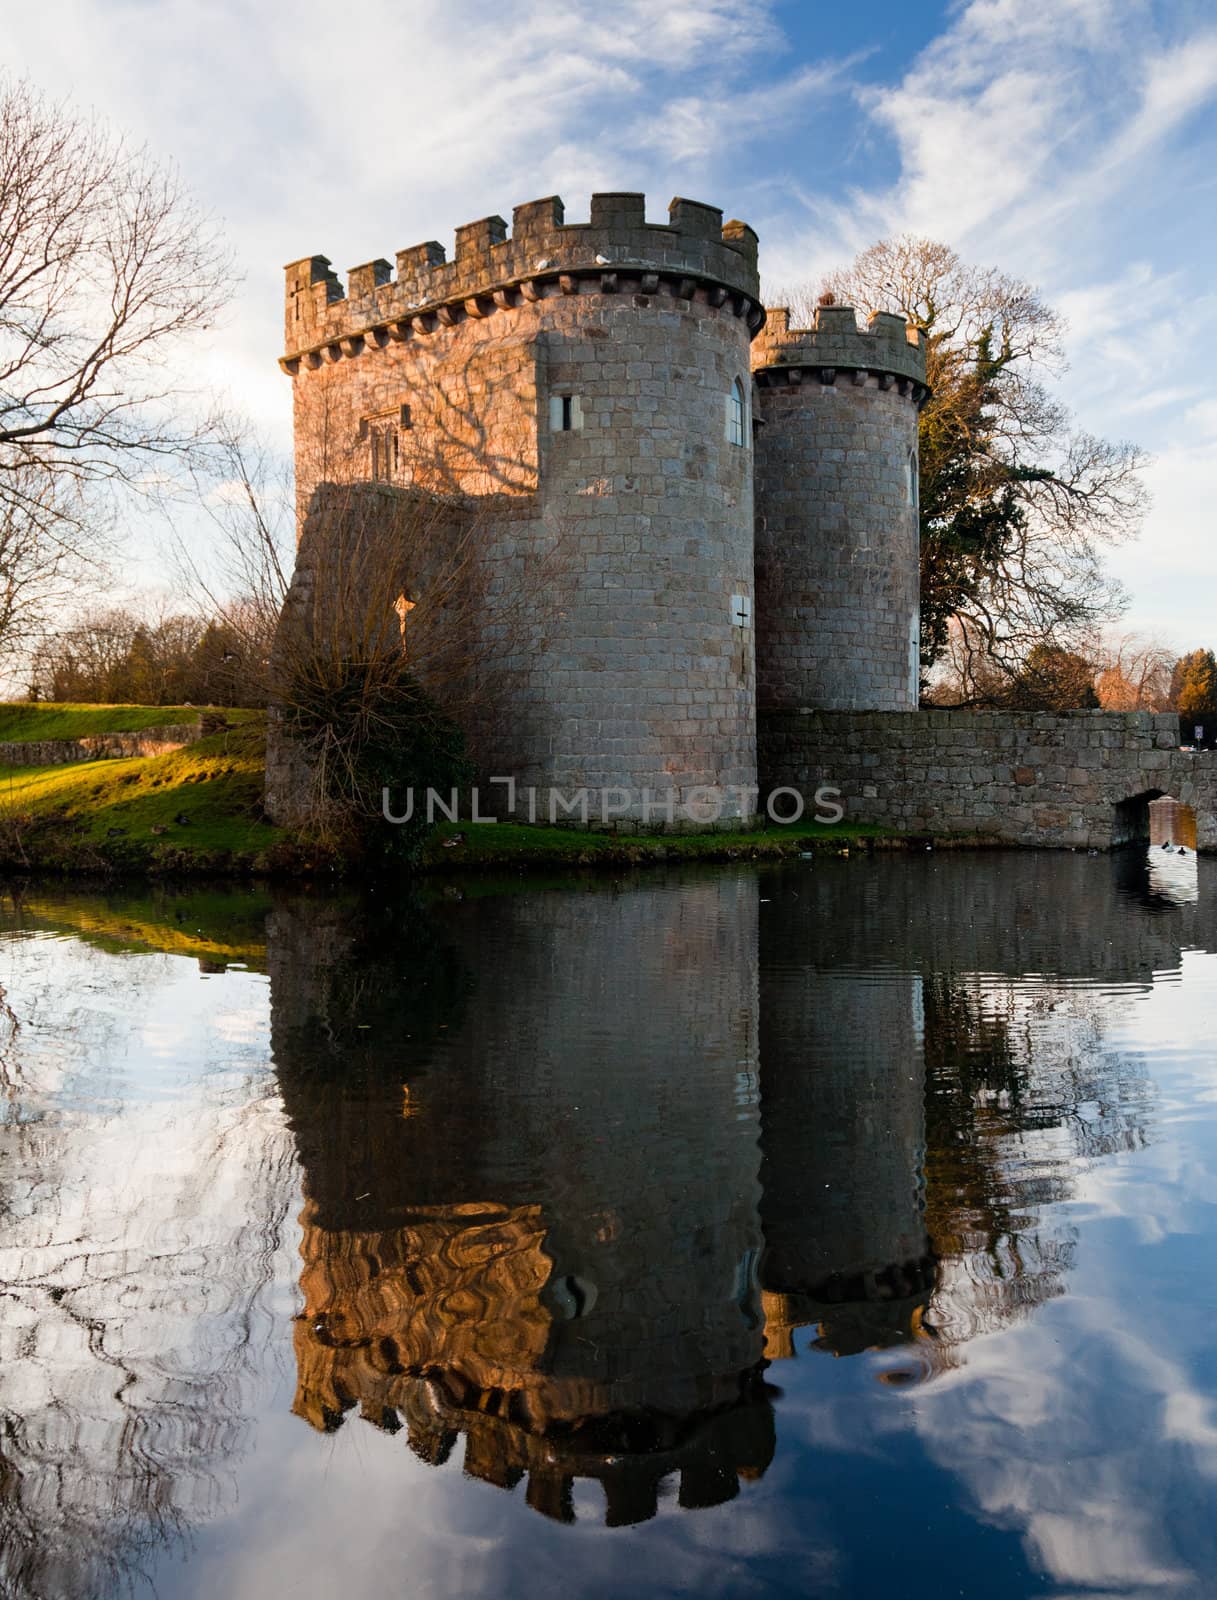 Ancient Whittington Castle in Shropshire, England reflecting in a calm moat round the stone buildings